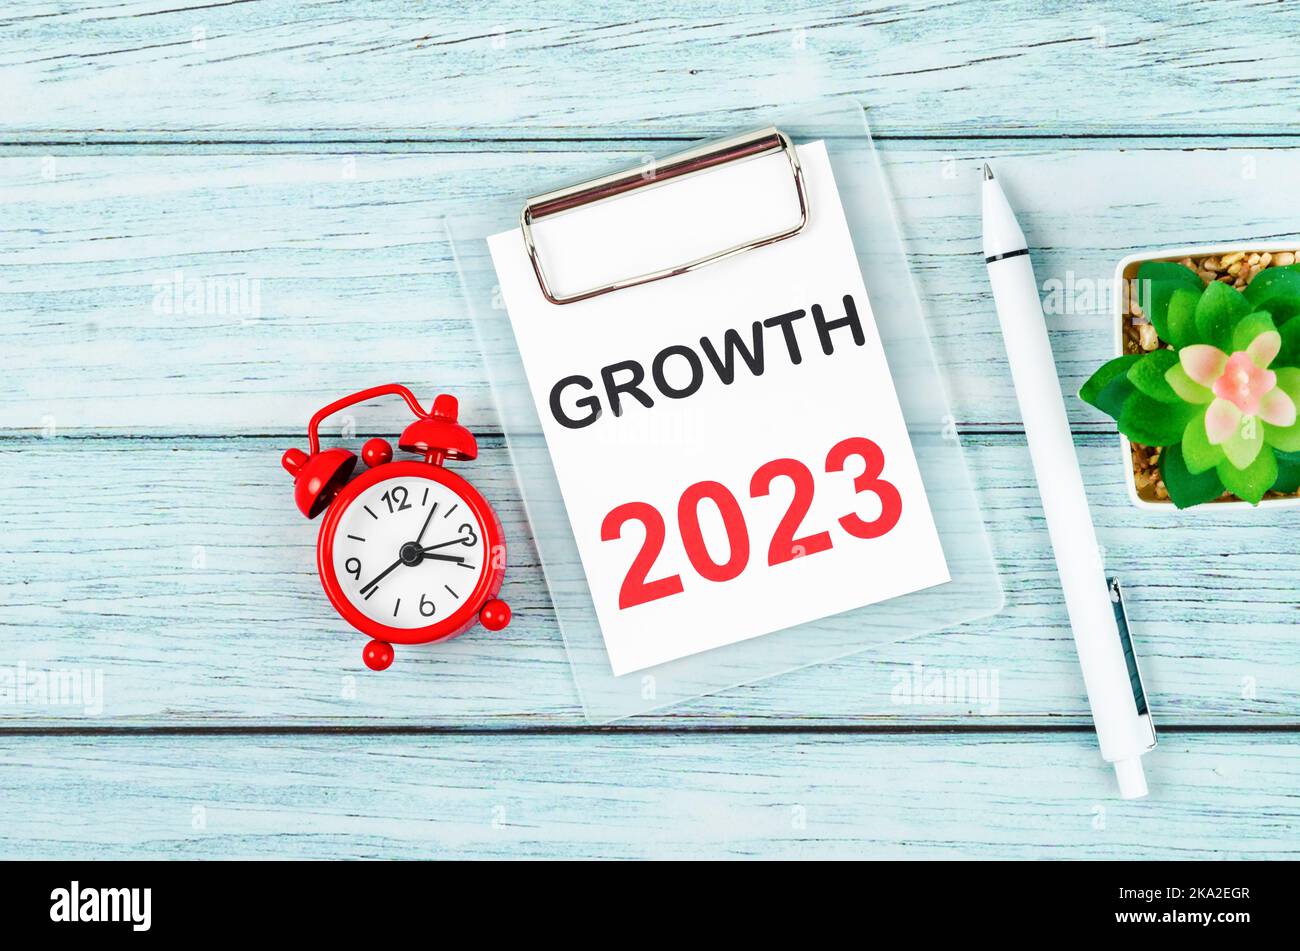 2023 Growth : Goal and Target Setting List for 2023 year with alarm clock. Change and determination concept. Stock Photo